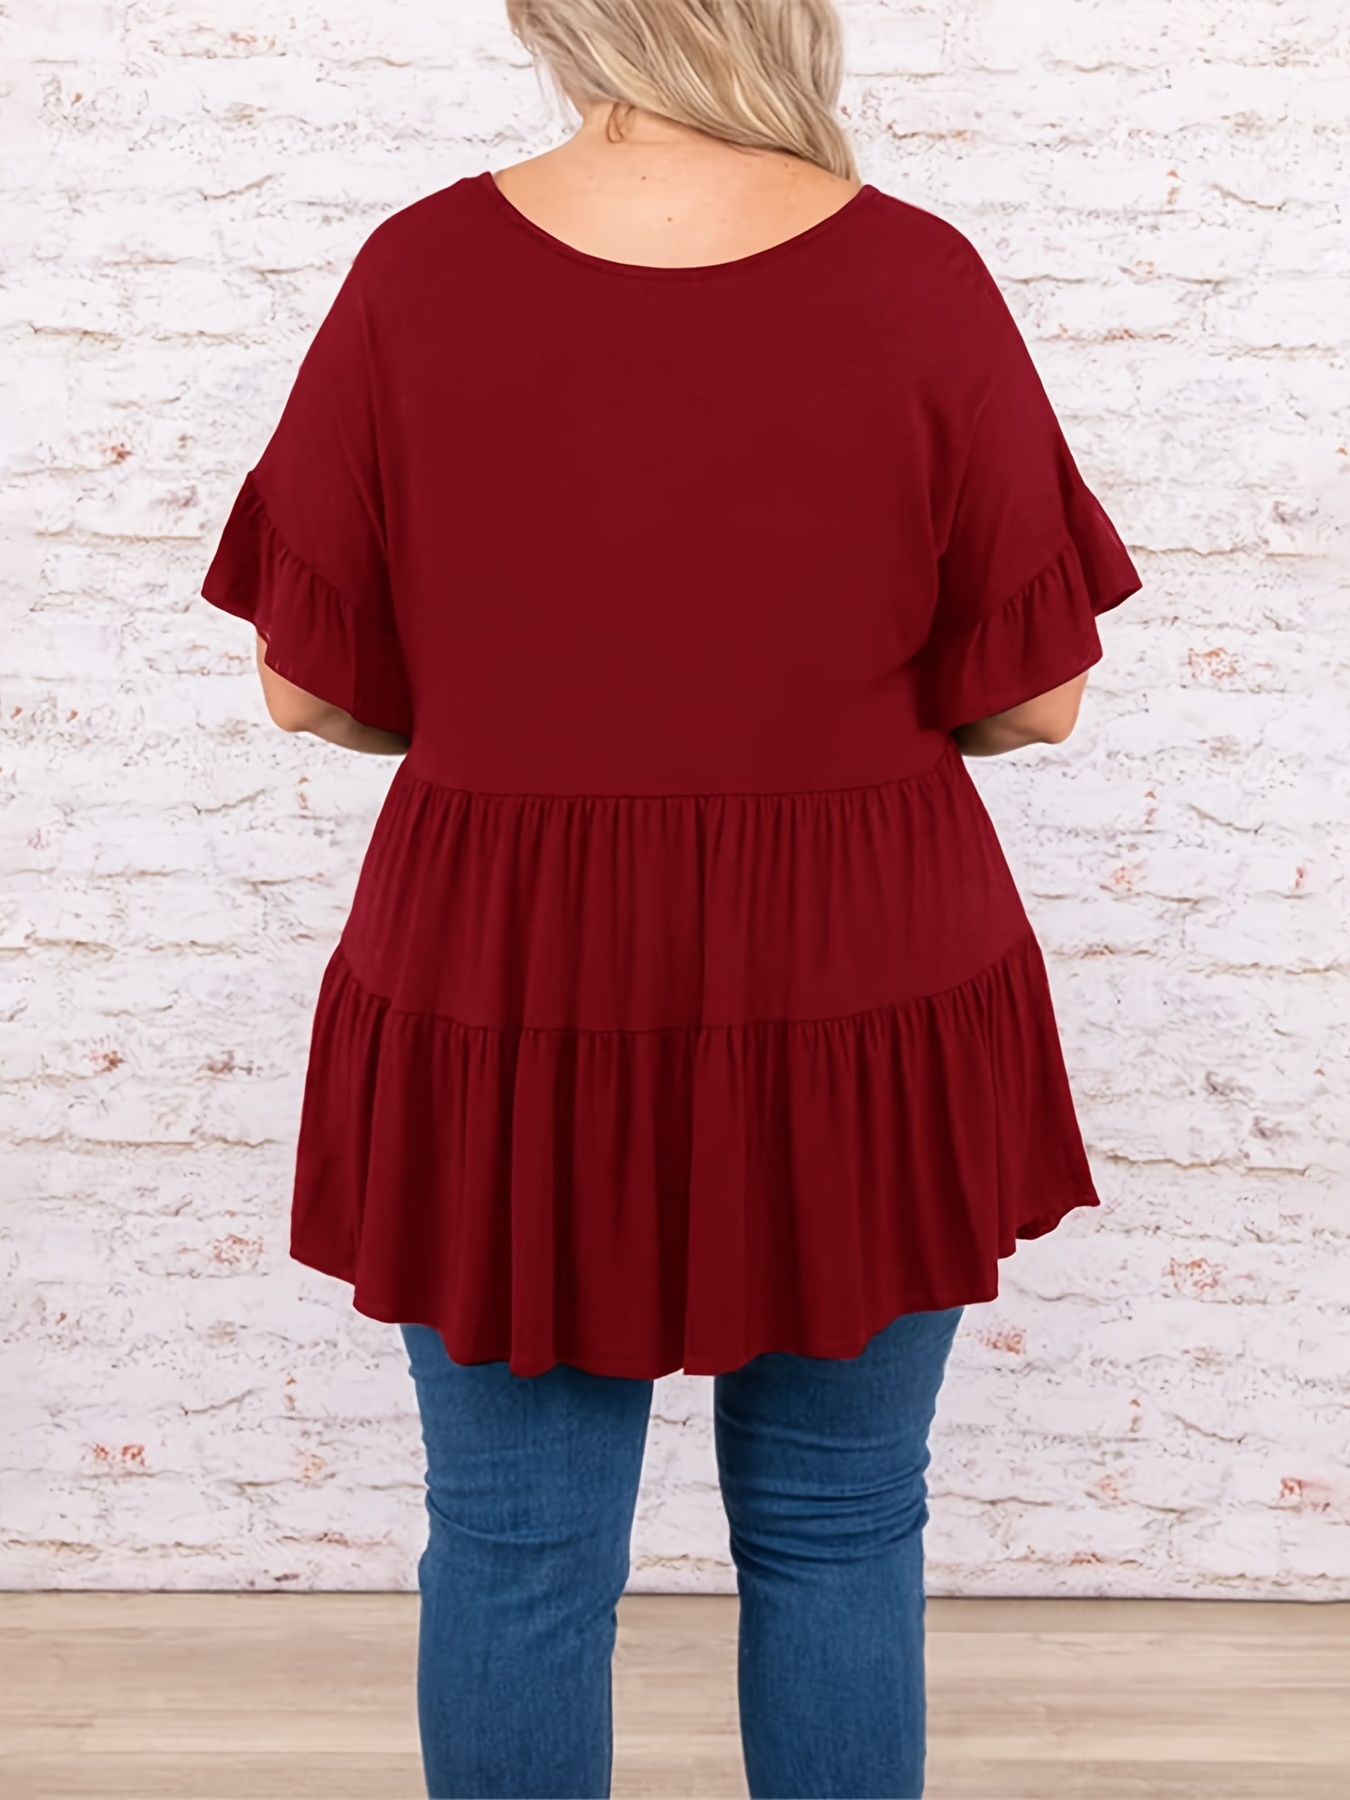 YOURS Plus Size Burgundy Red Keyhole Peplum Top